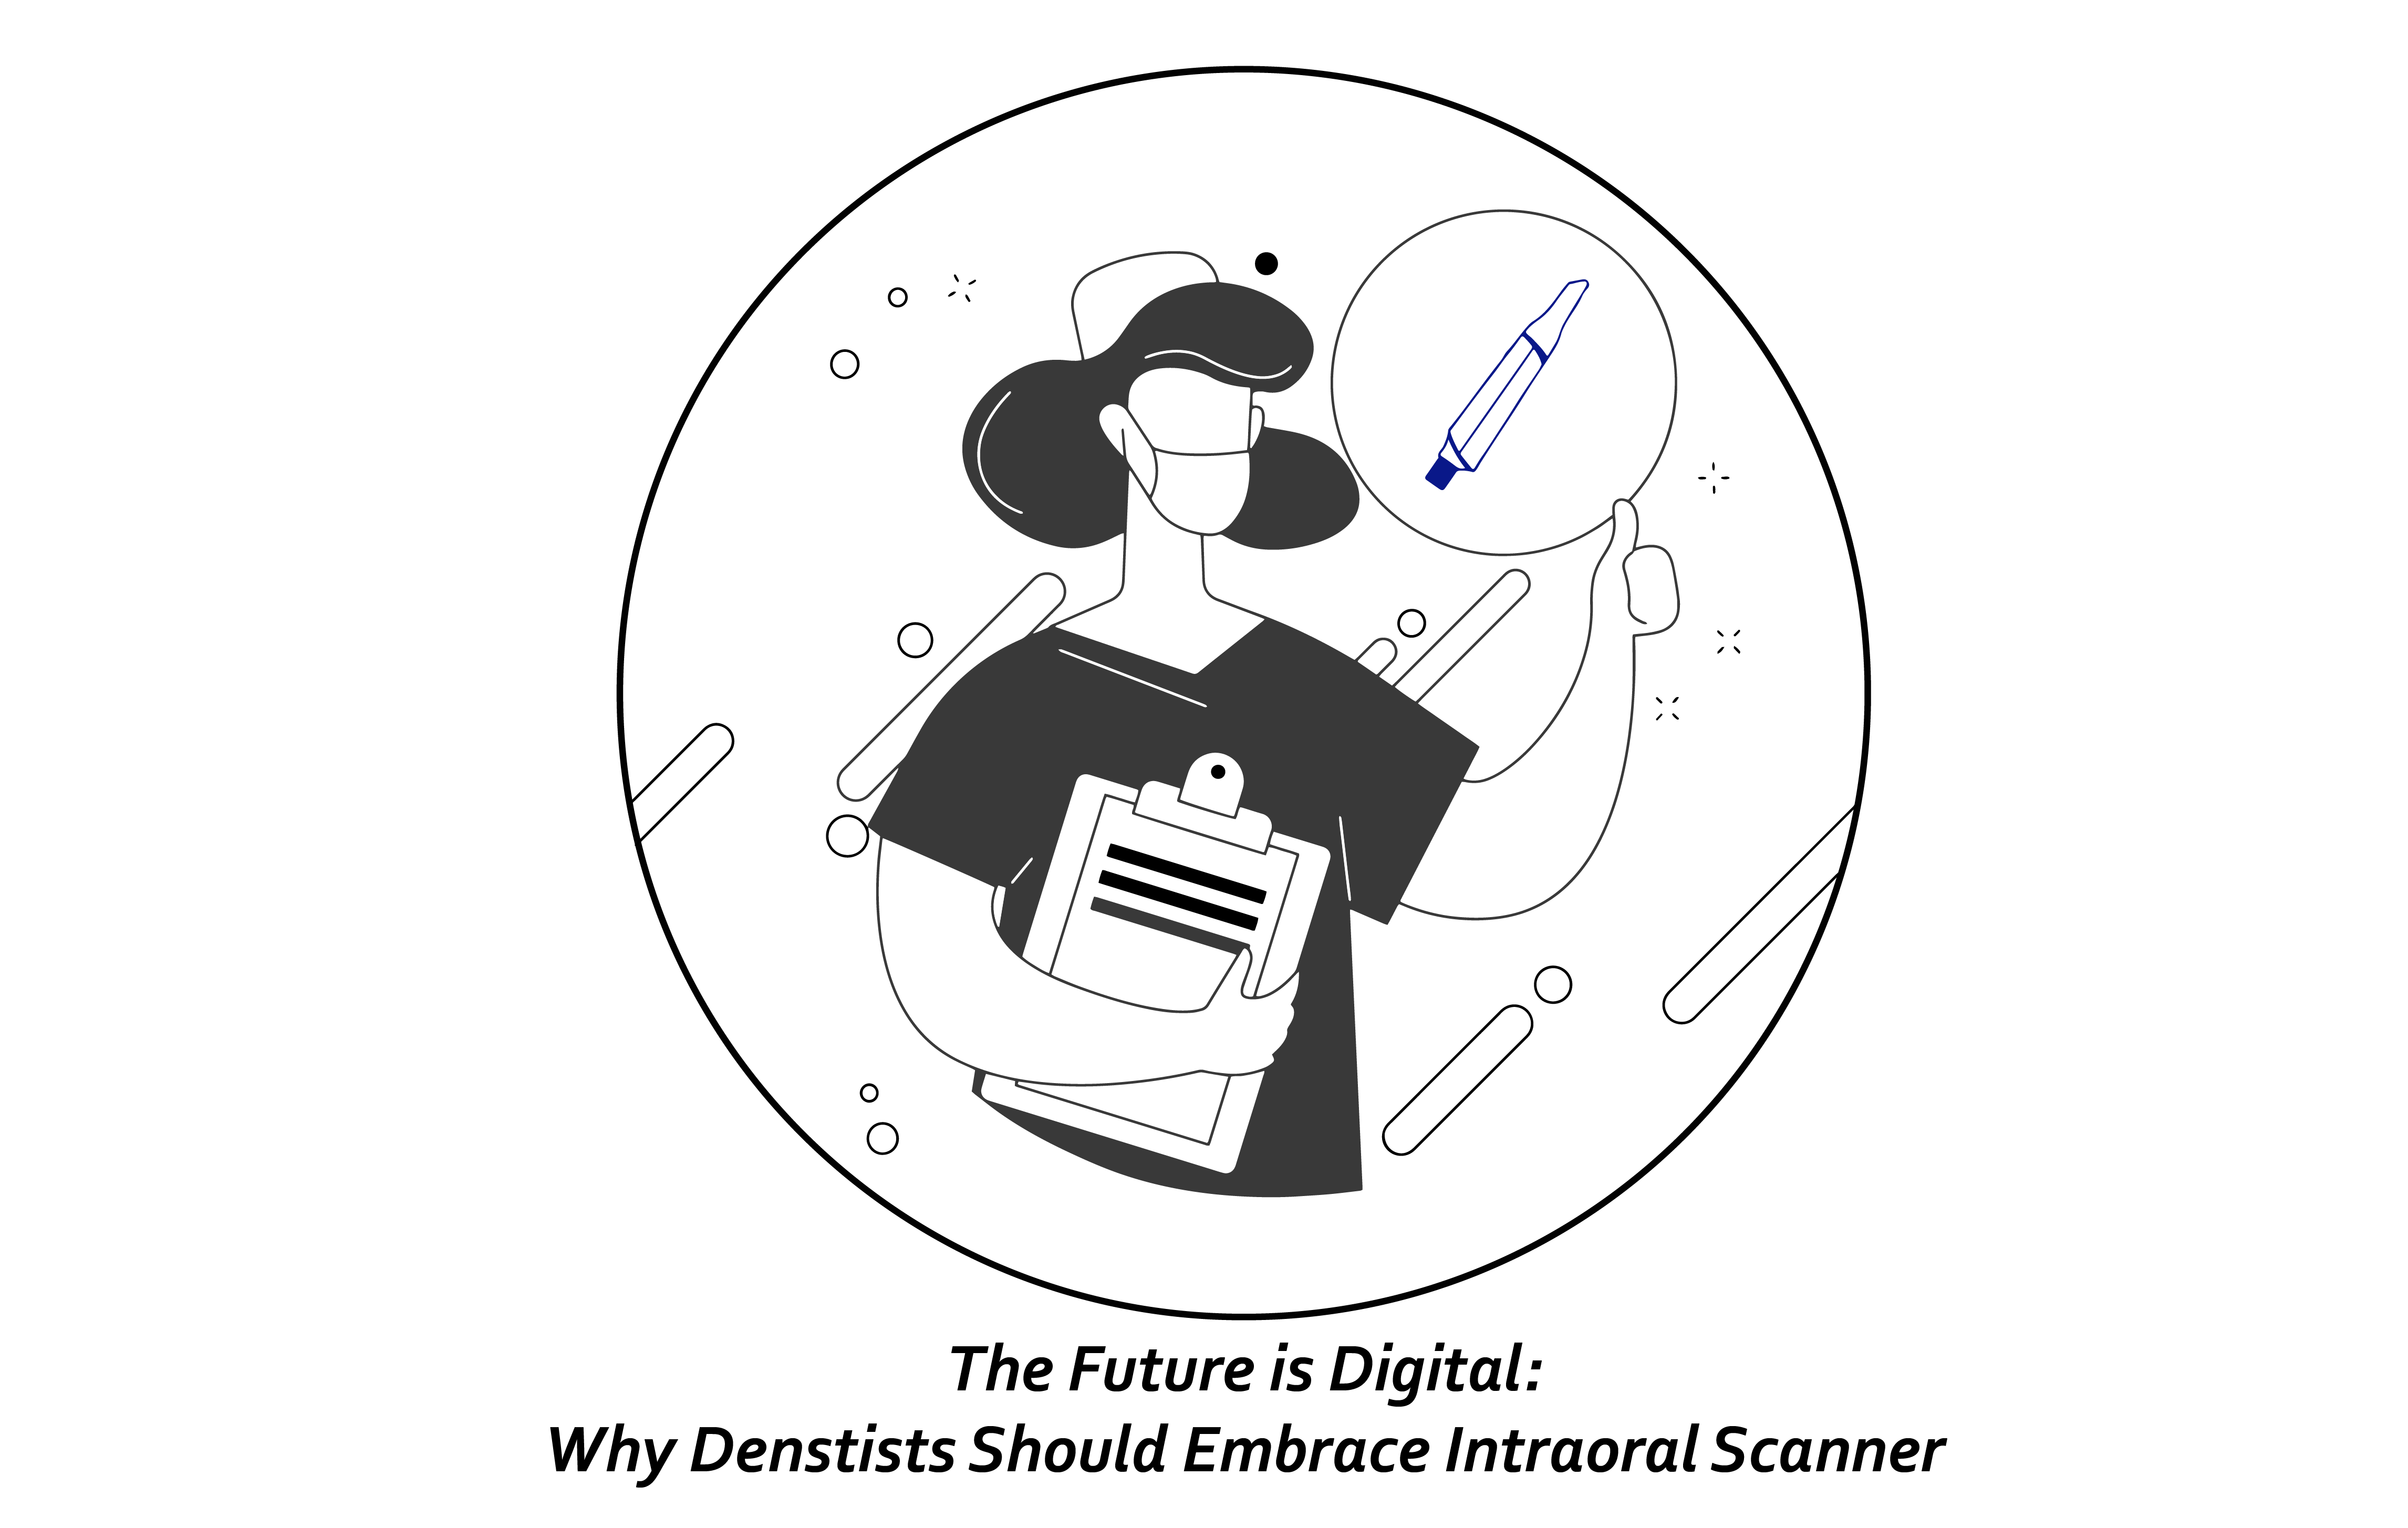 The Future is Digital: Why Dentists Should Embrace Intraoral Scanner